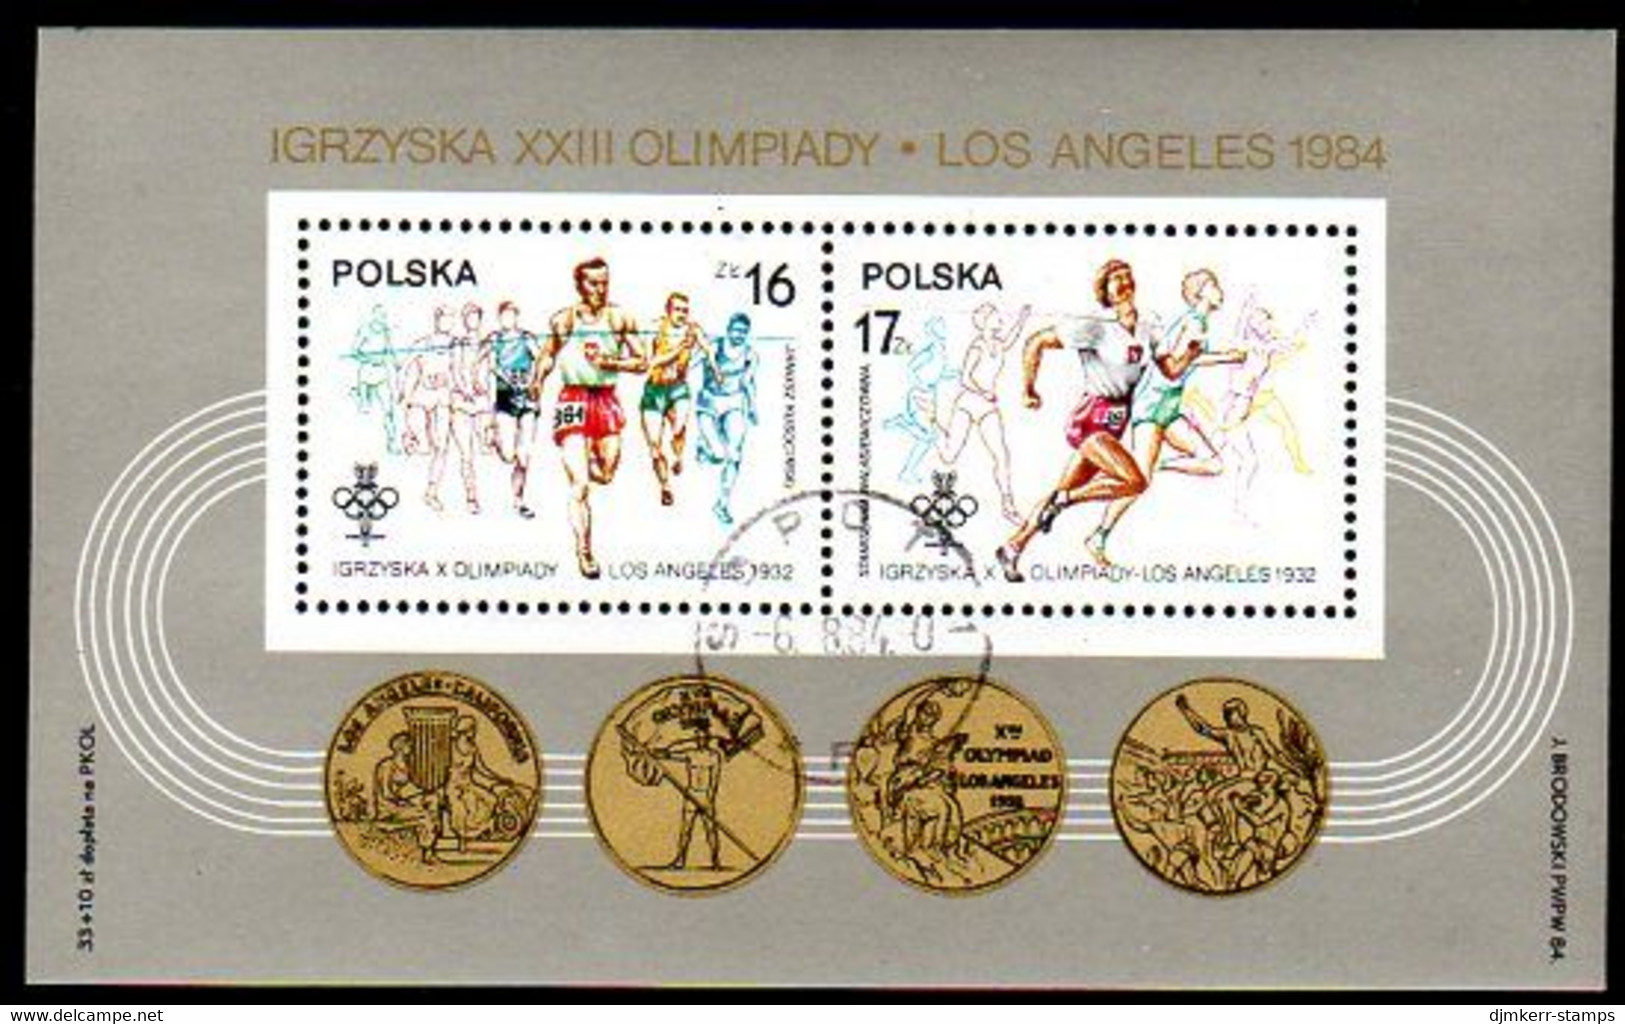 POLAND 1984 Olympic Games Block Used.  Michel Block 94 - Used Stamps